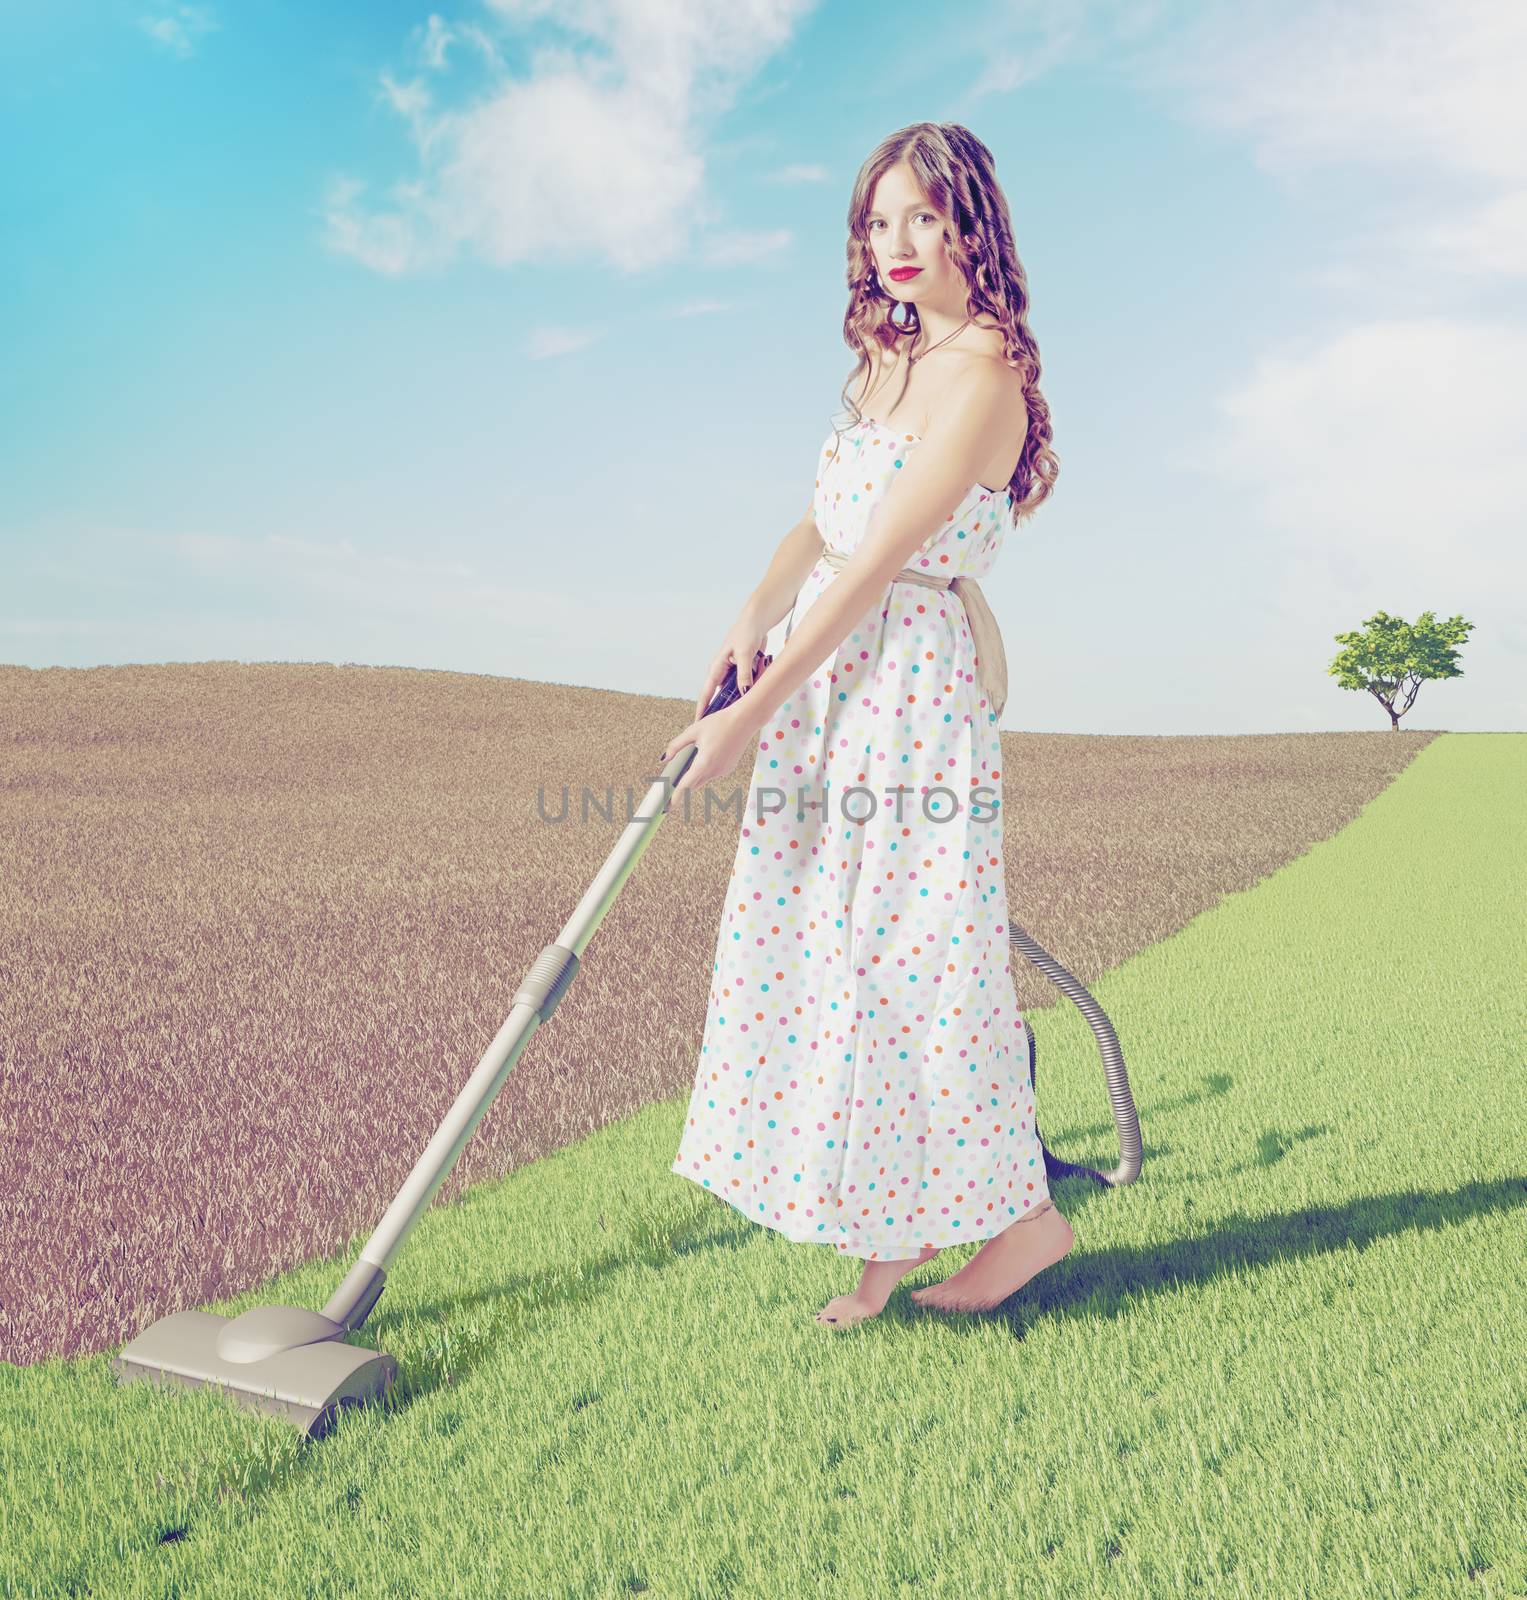 Young woman cleaning natural green grass  in wild  landscape. Creative concept photo combinated